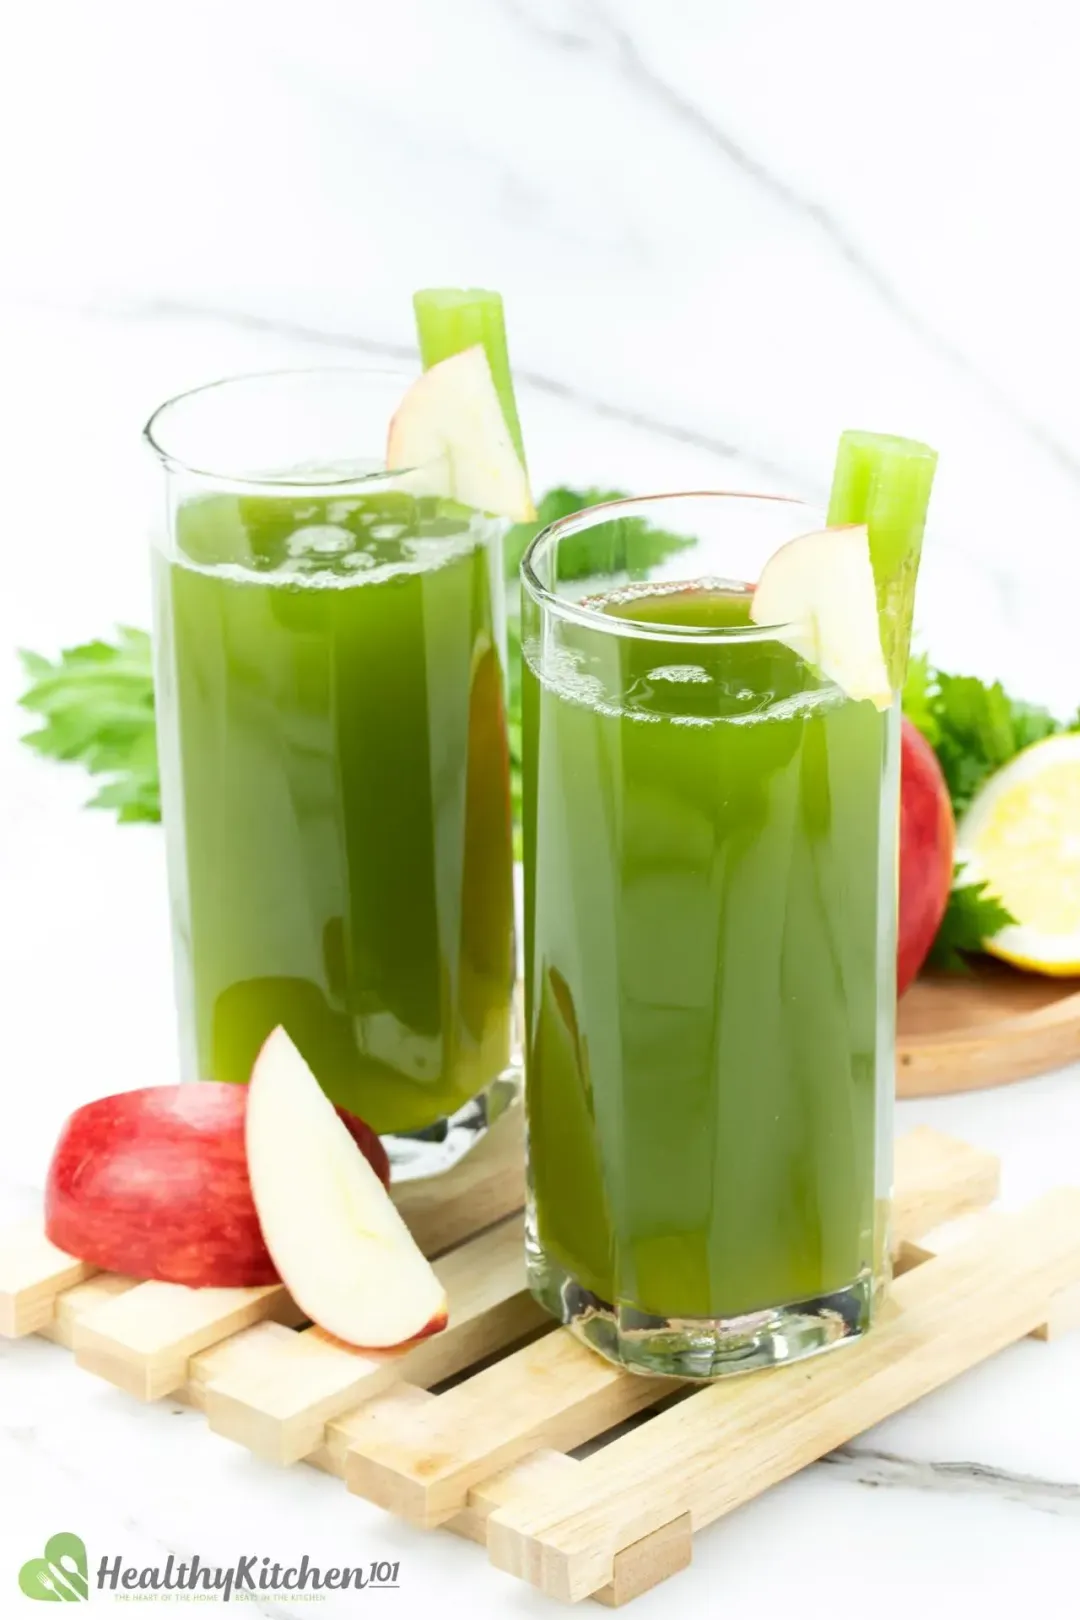 Two glasses of celery juice put on wooden bars, next to red apple wedges and greens